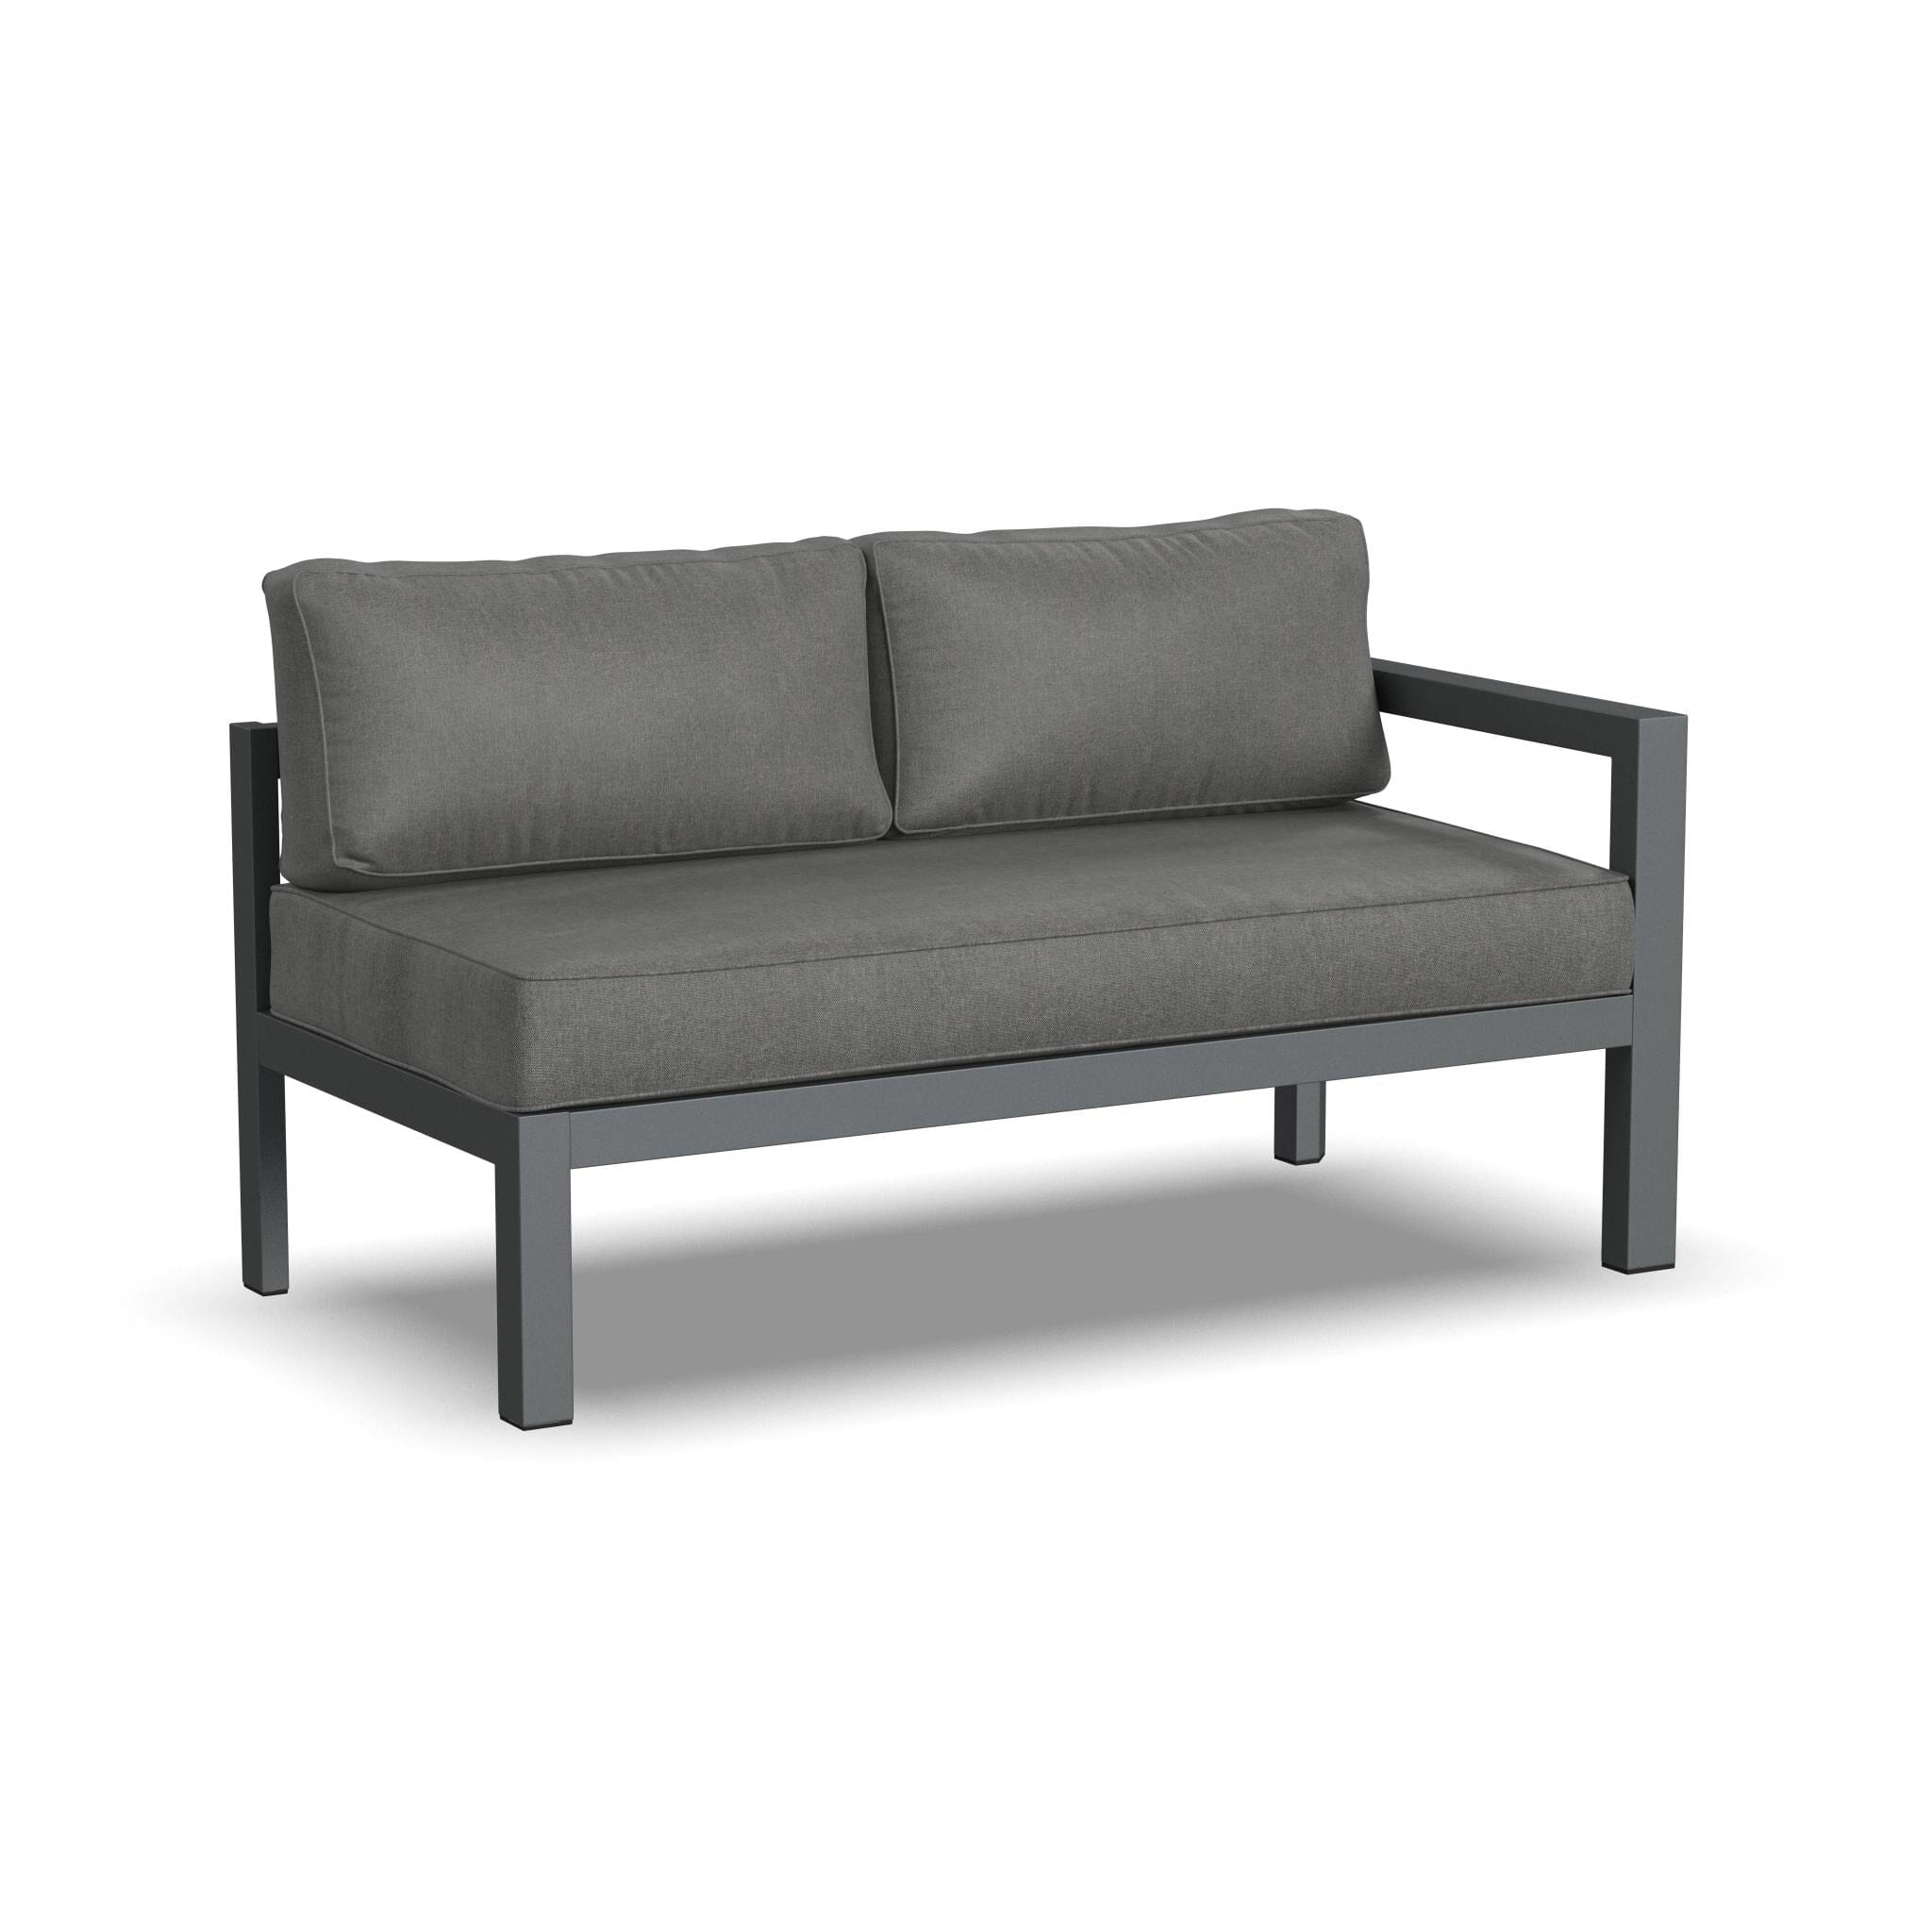 Modern & Contemporary 5 Seat Sectional w/ Ottoman By Grayton Outdoor Seating Grayton